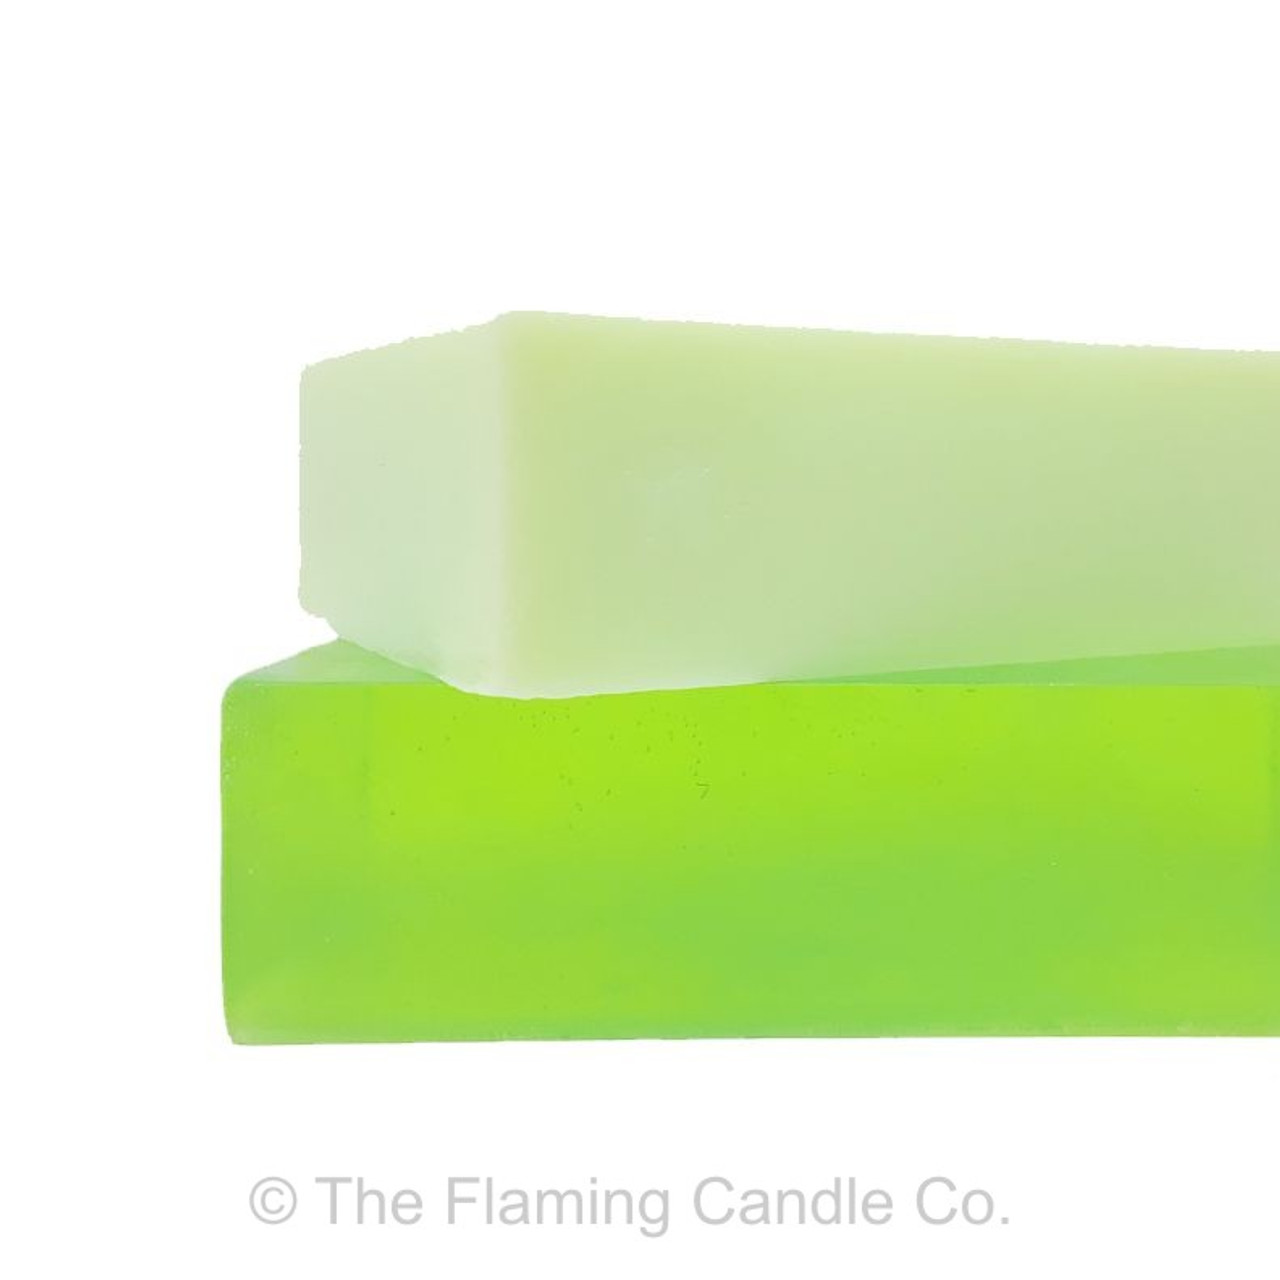 Neon Yellow Fluorescent Dye, Cosmetic Safe, Candles, Wax Melts